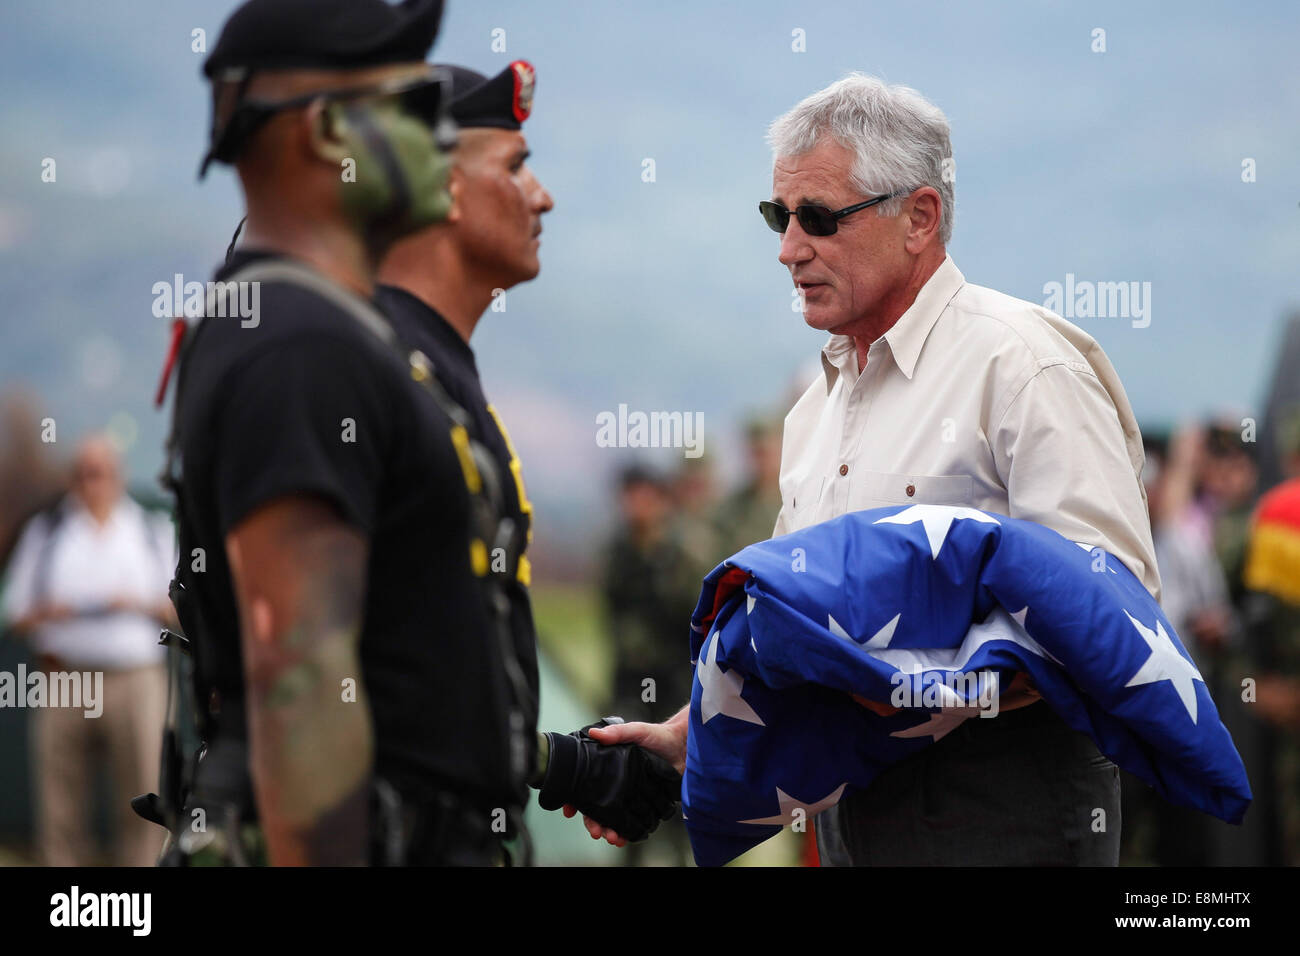 Melgar, Colombia. 10th Oct, 2014. U.S. Defense Secretary Chuck Hagel (R) takes part in a ceremony during his visit to the Tolemaida batallion in Melgar, Colombia, on Oct. 10, 2014. Credit:  Jhon Paz/Xinhua/Alamy Live News Stock Photo